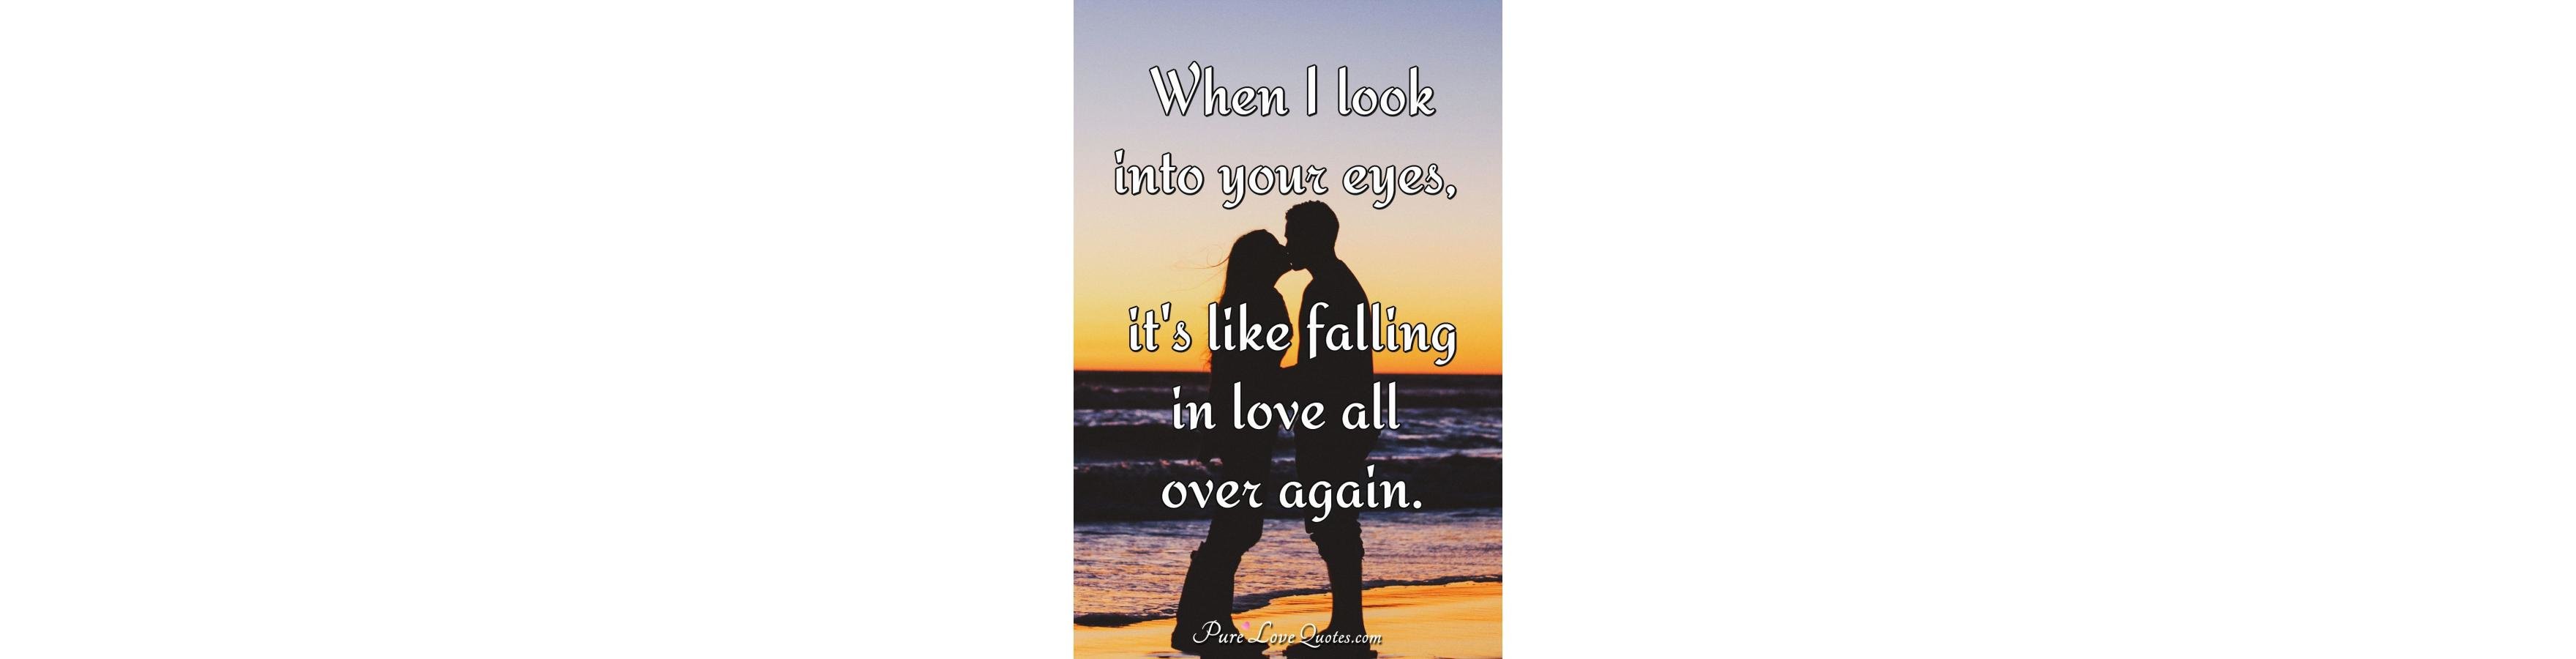 When I look into your eyes, it's like falling in love all over again. | PureLoveQuotes